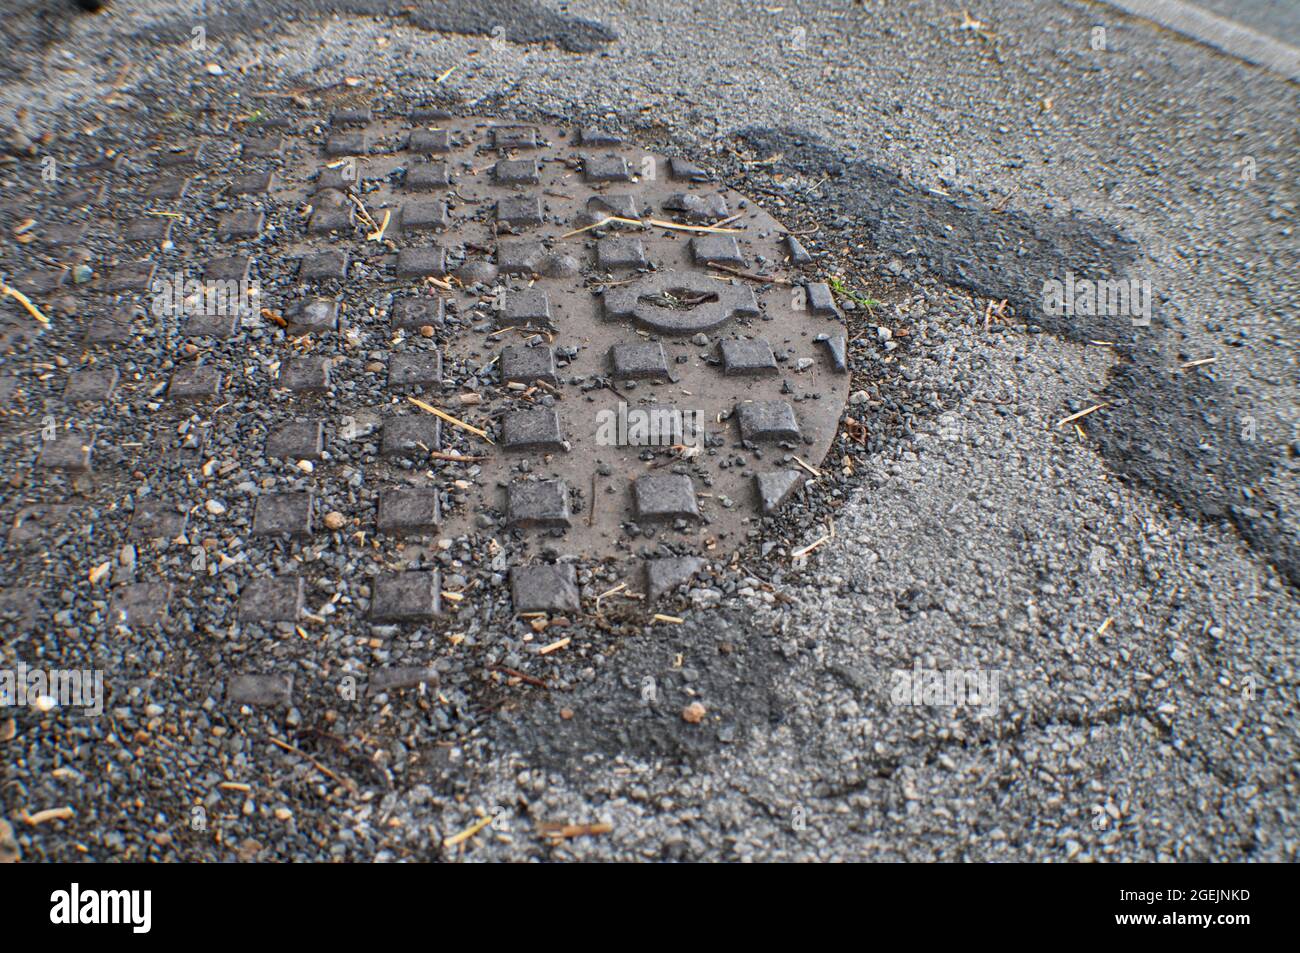 Man hole cover partly covered with stones and loose tarmac chippings Stock Photo